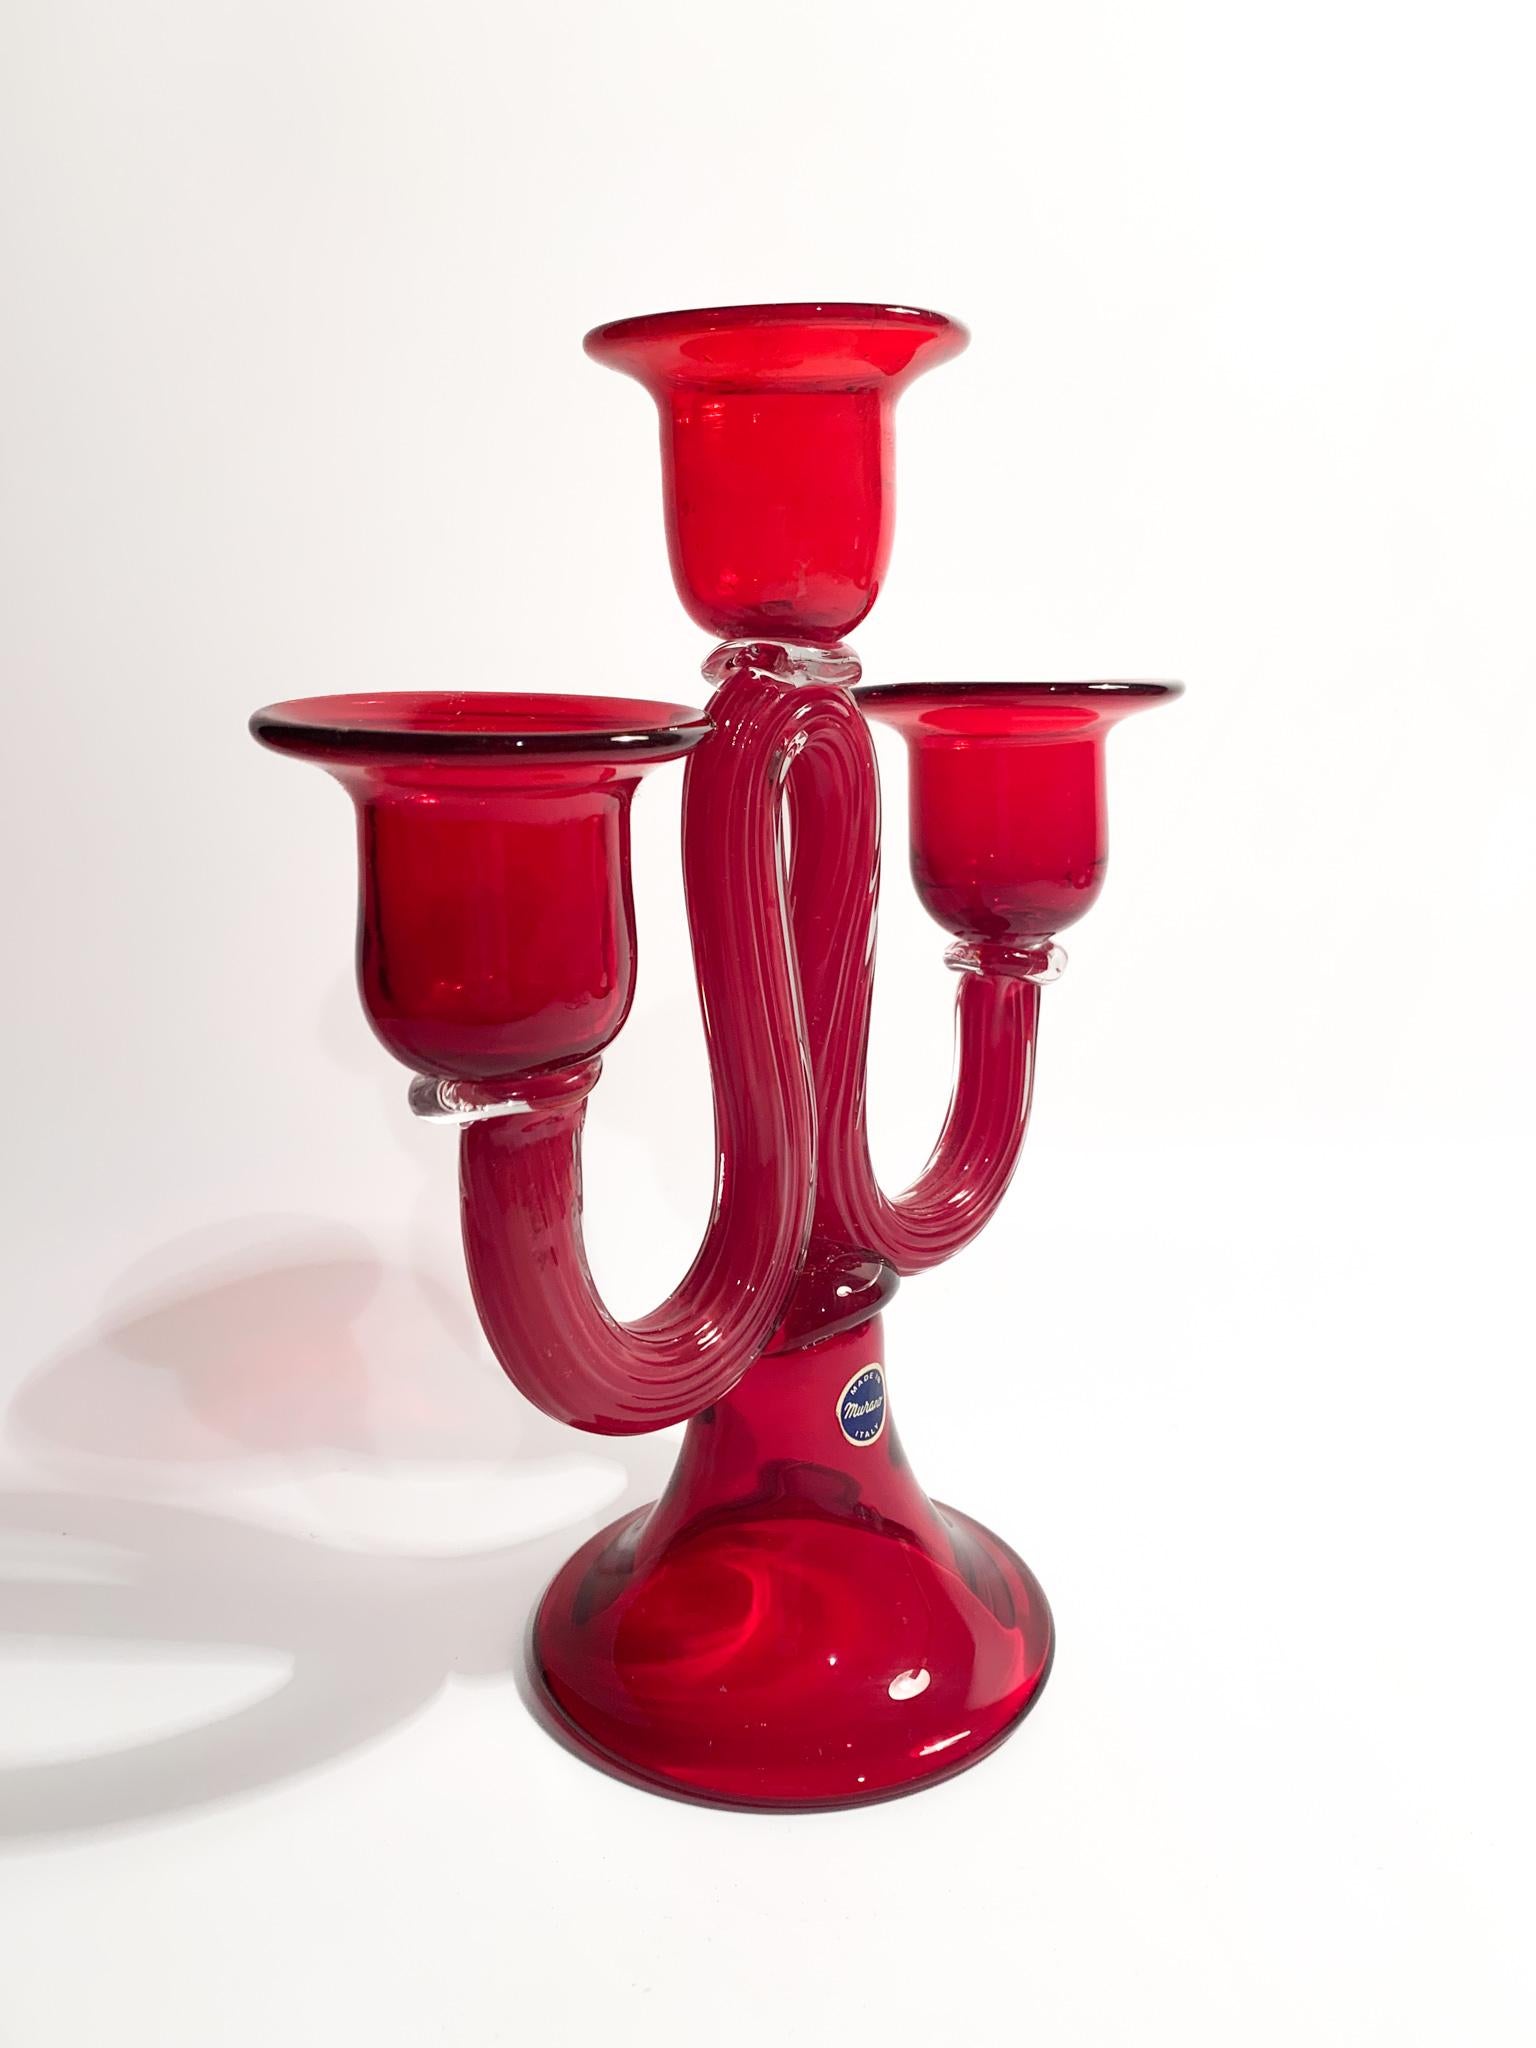 Mid-Century Modern Three-armed Candelabra in Red Murano Glass from the 1950s